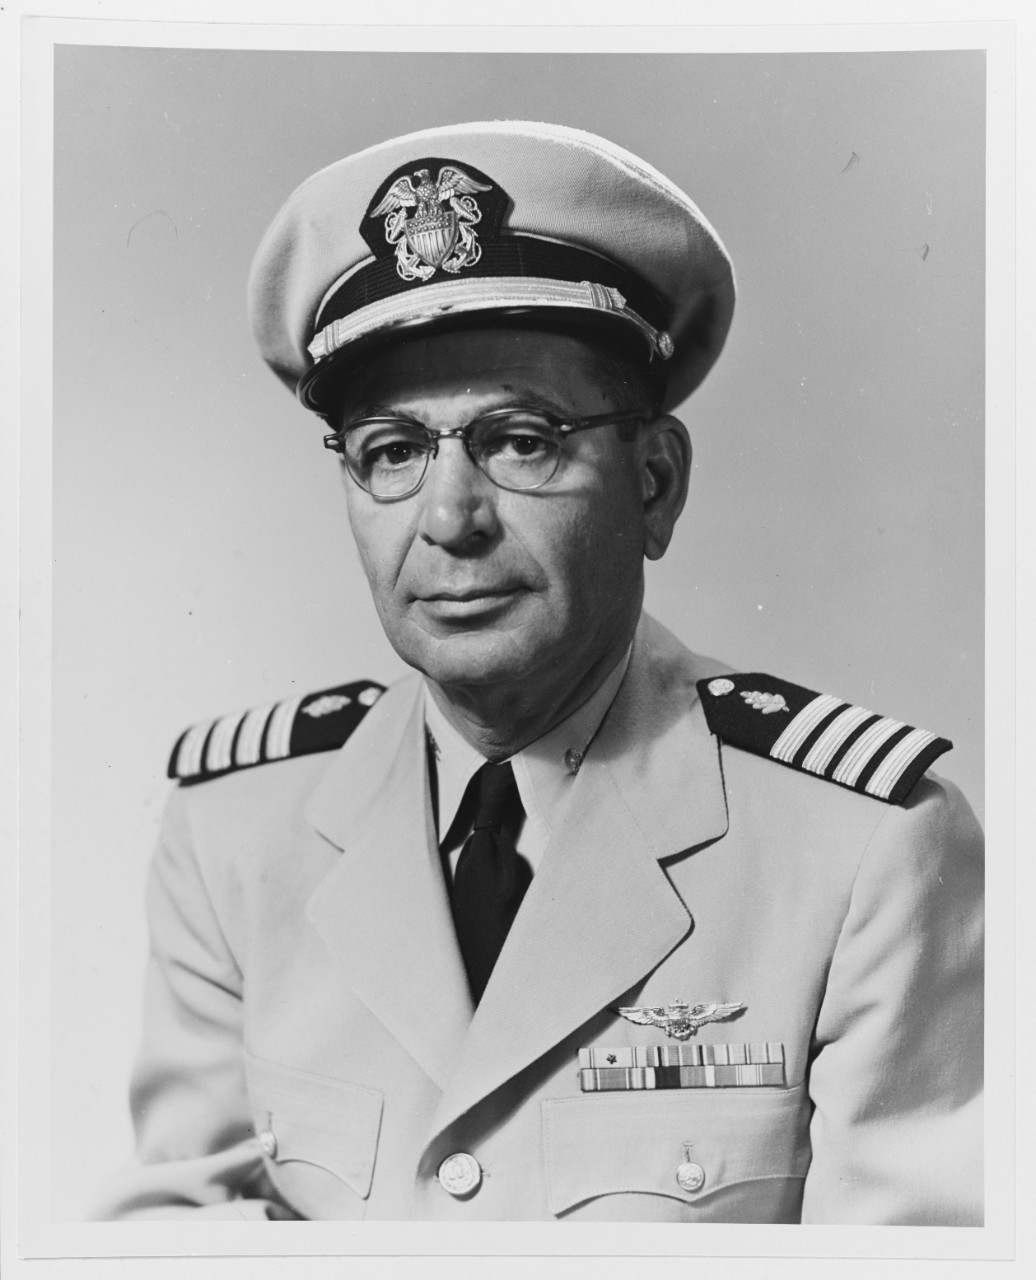 Captain J. C. Early